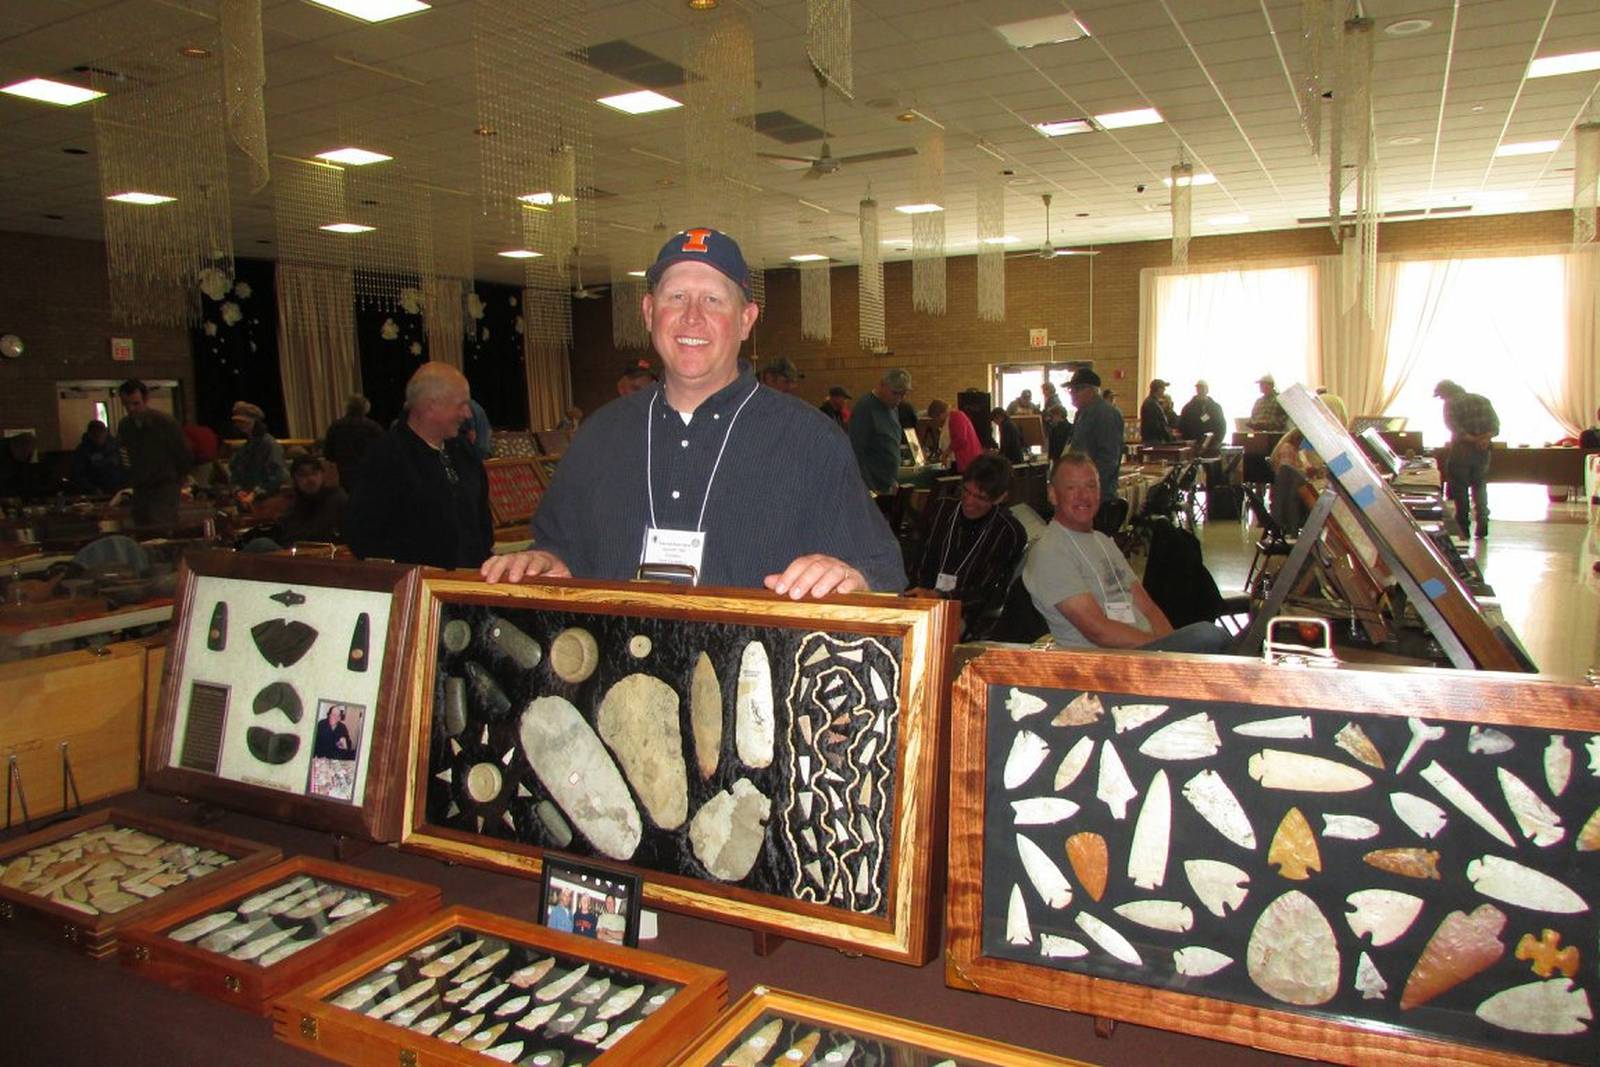 Starved Rock Native American Artifact Show scheduled July 17 in Utica